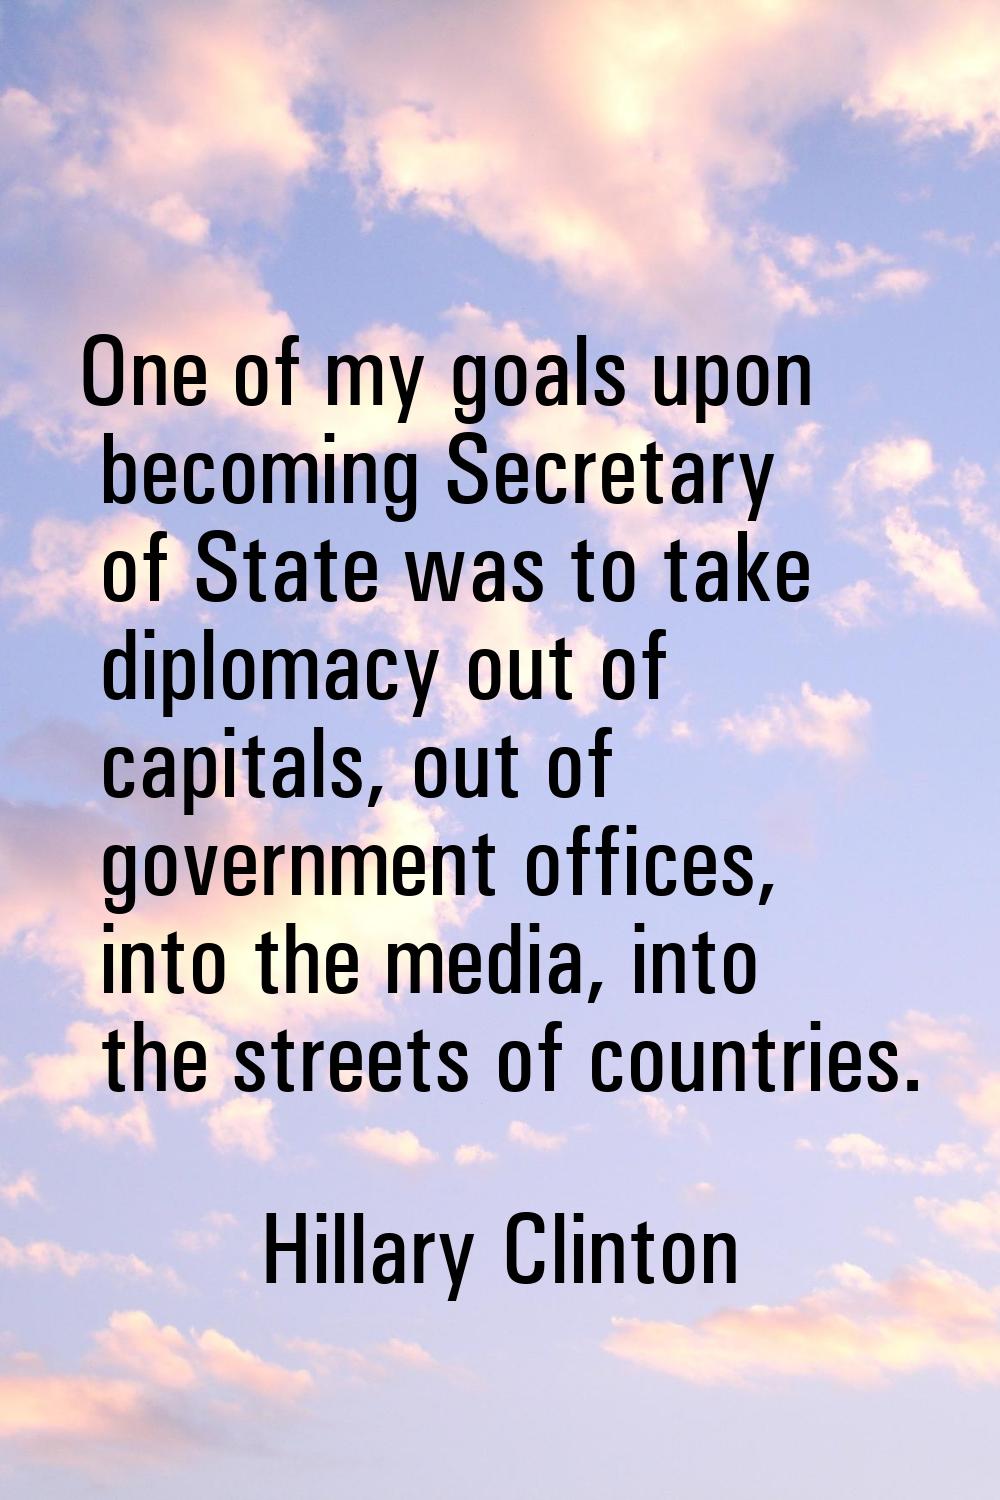 One of my goals upon becoming Secretary of State was to take diplomacy out of capitals, out of gove